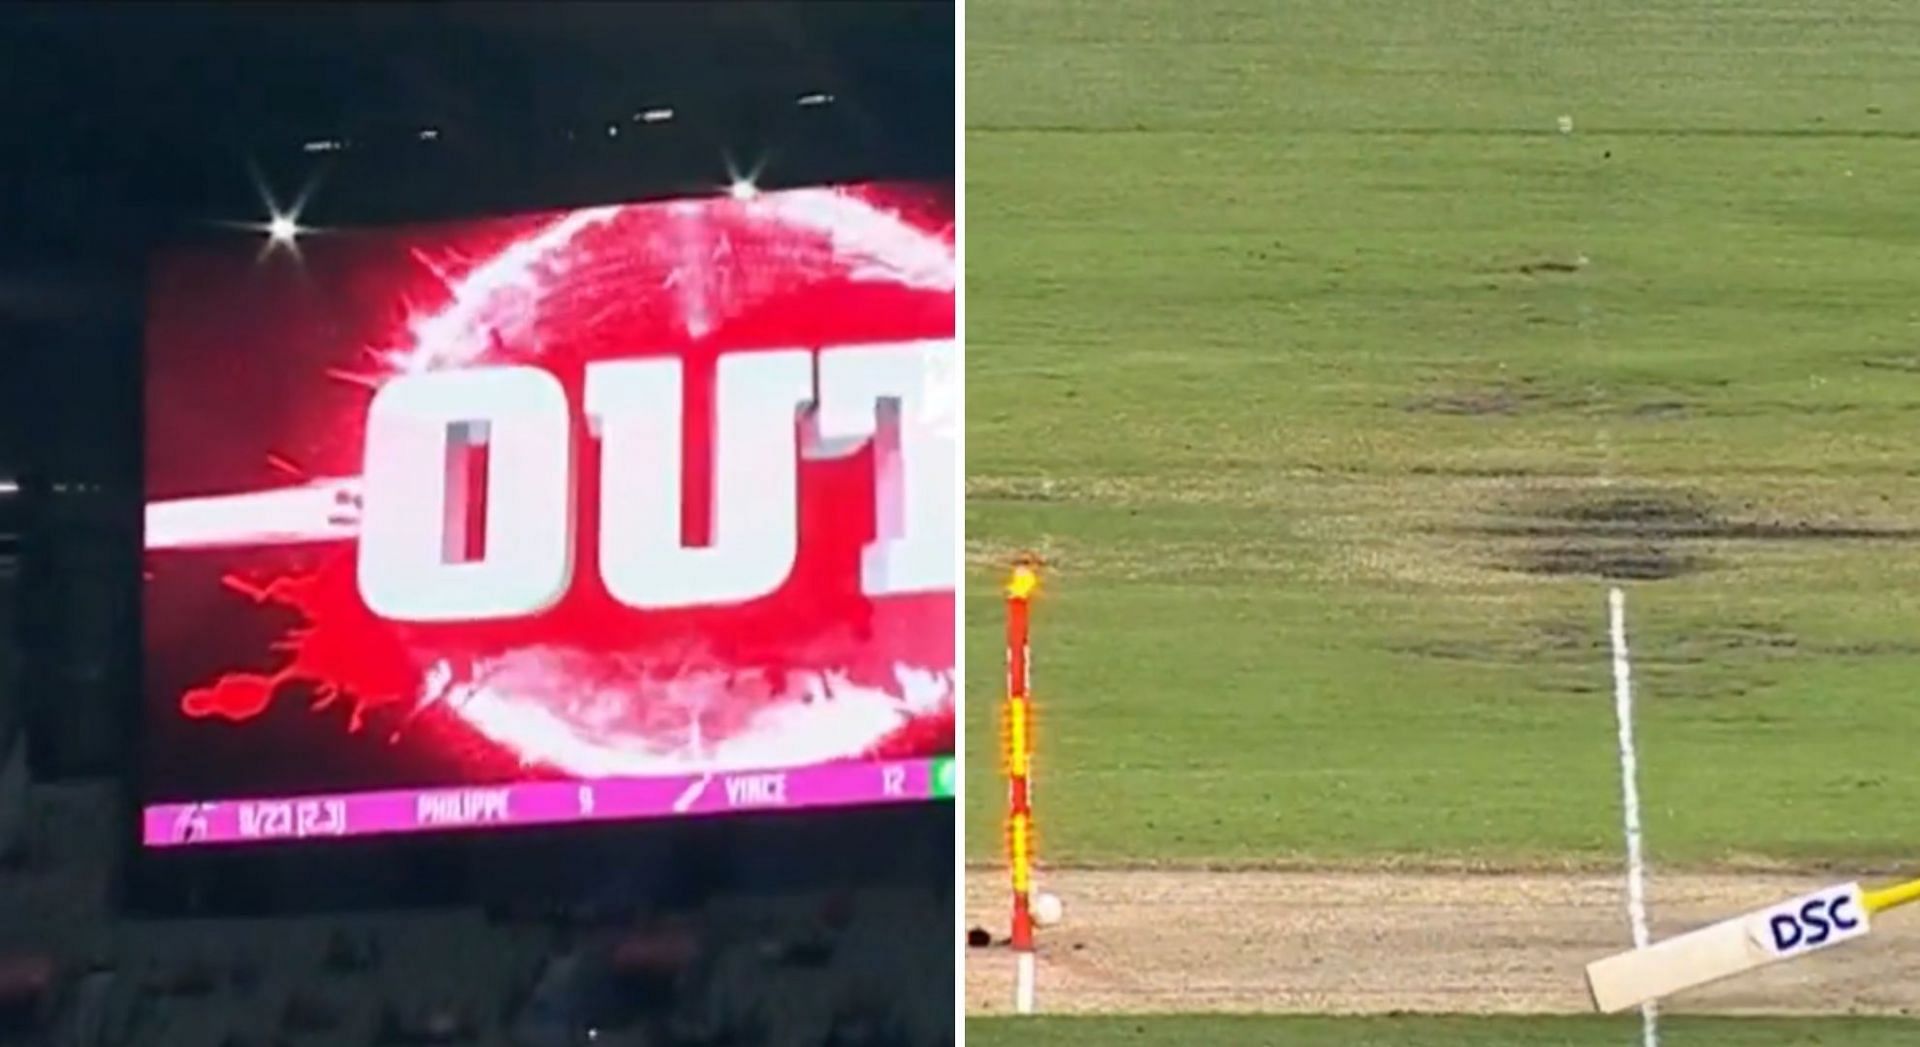 [Watch] TV umpire presses the wrong button during Melbourne Stars and Sydney Sixers BBL clash